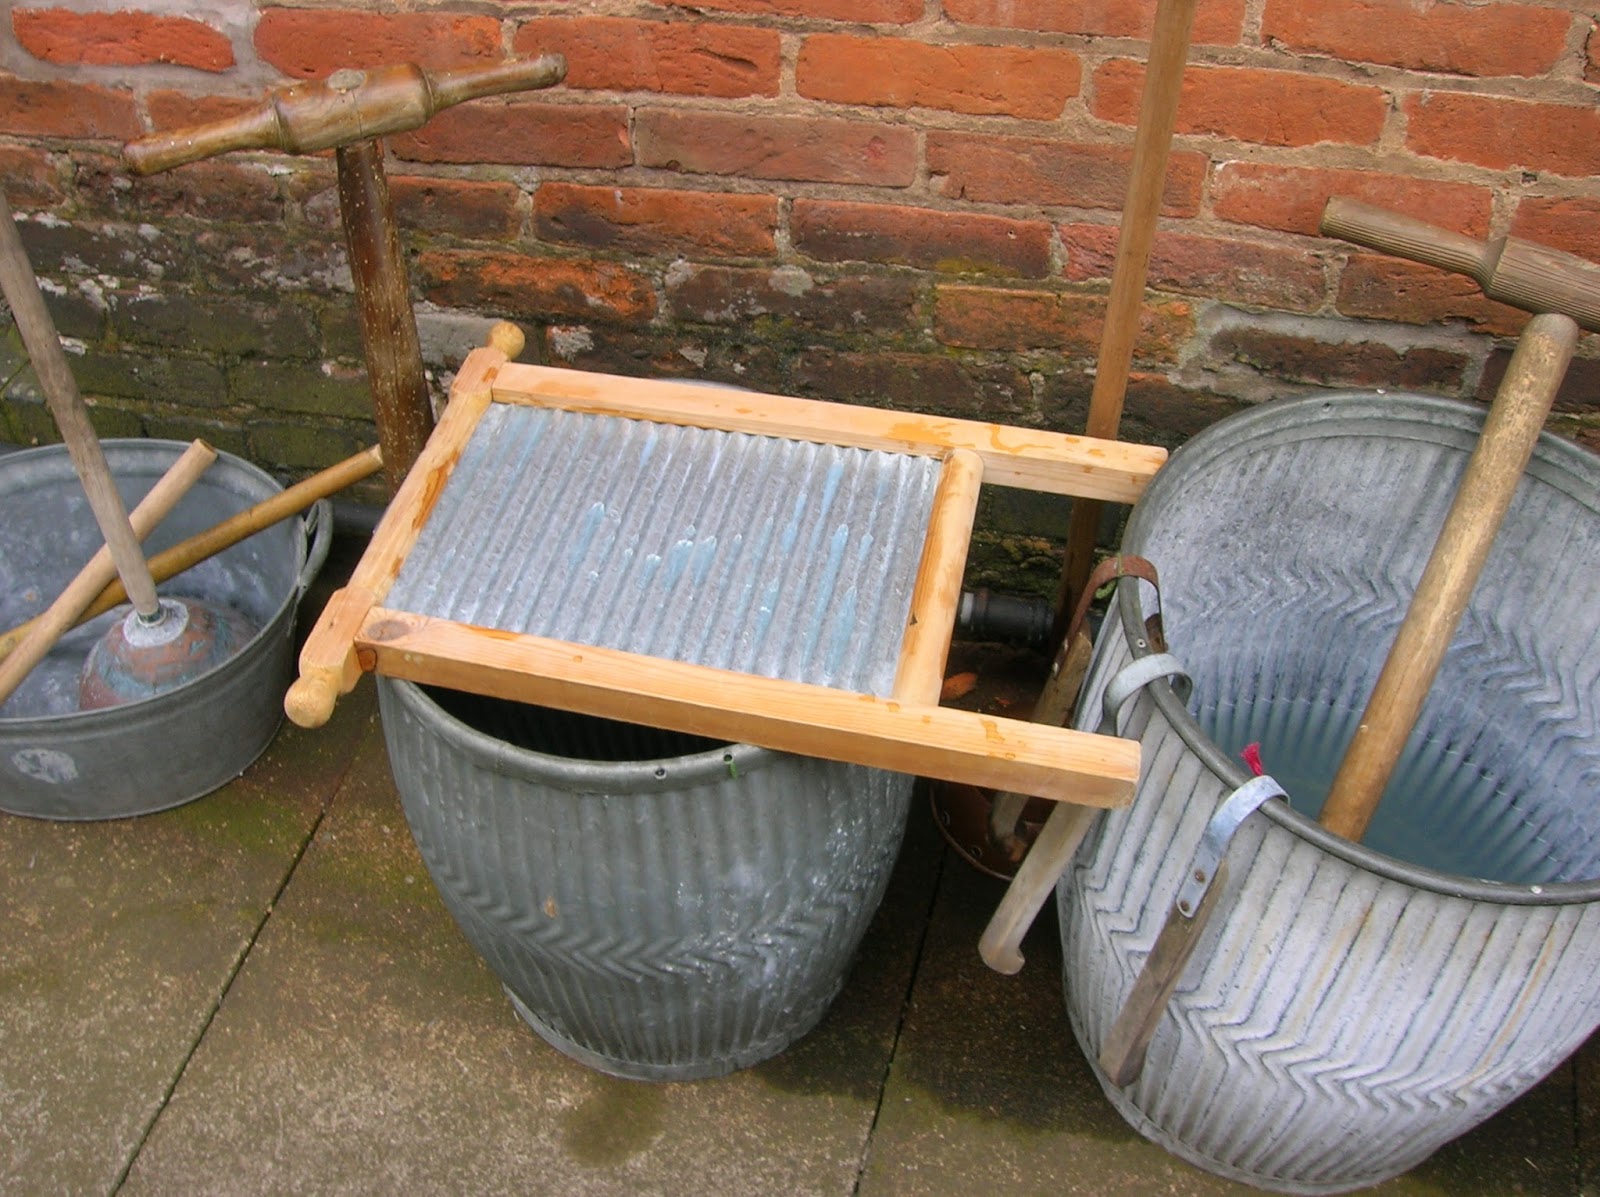 Old Fashioned Wash Day - Dolly Tubs, Posser and Scrubbing Board